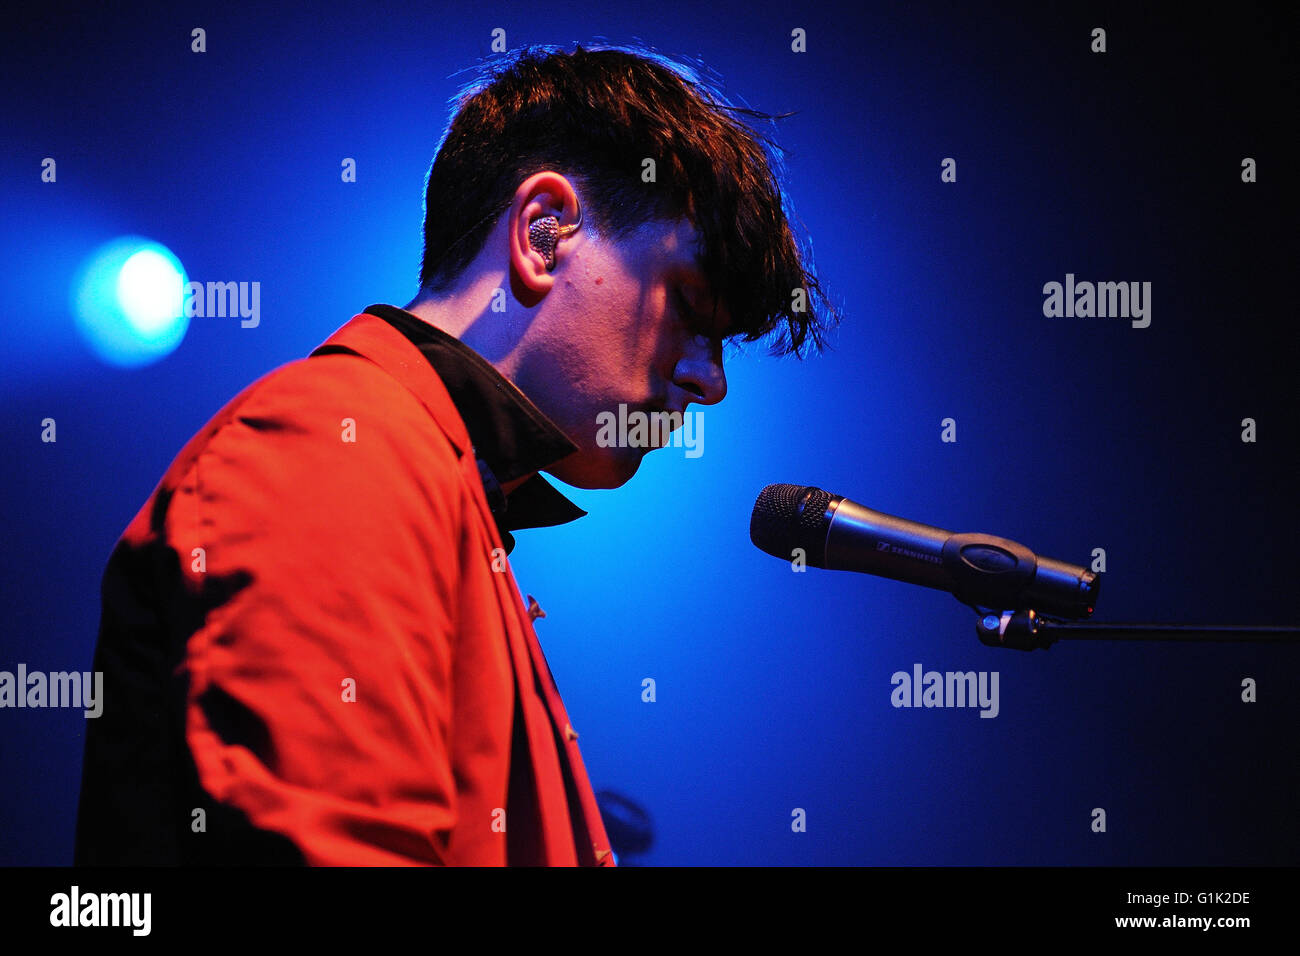 BARCELONA - OCT 14: Patrick Wolf (singer) performs at Apolo on October 14, 2011 in Barcelona, Spain. Stock Photo